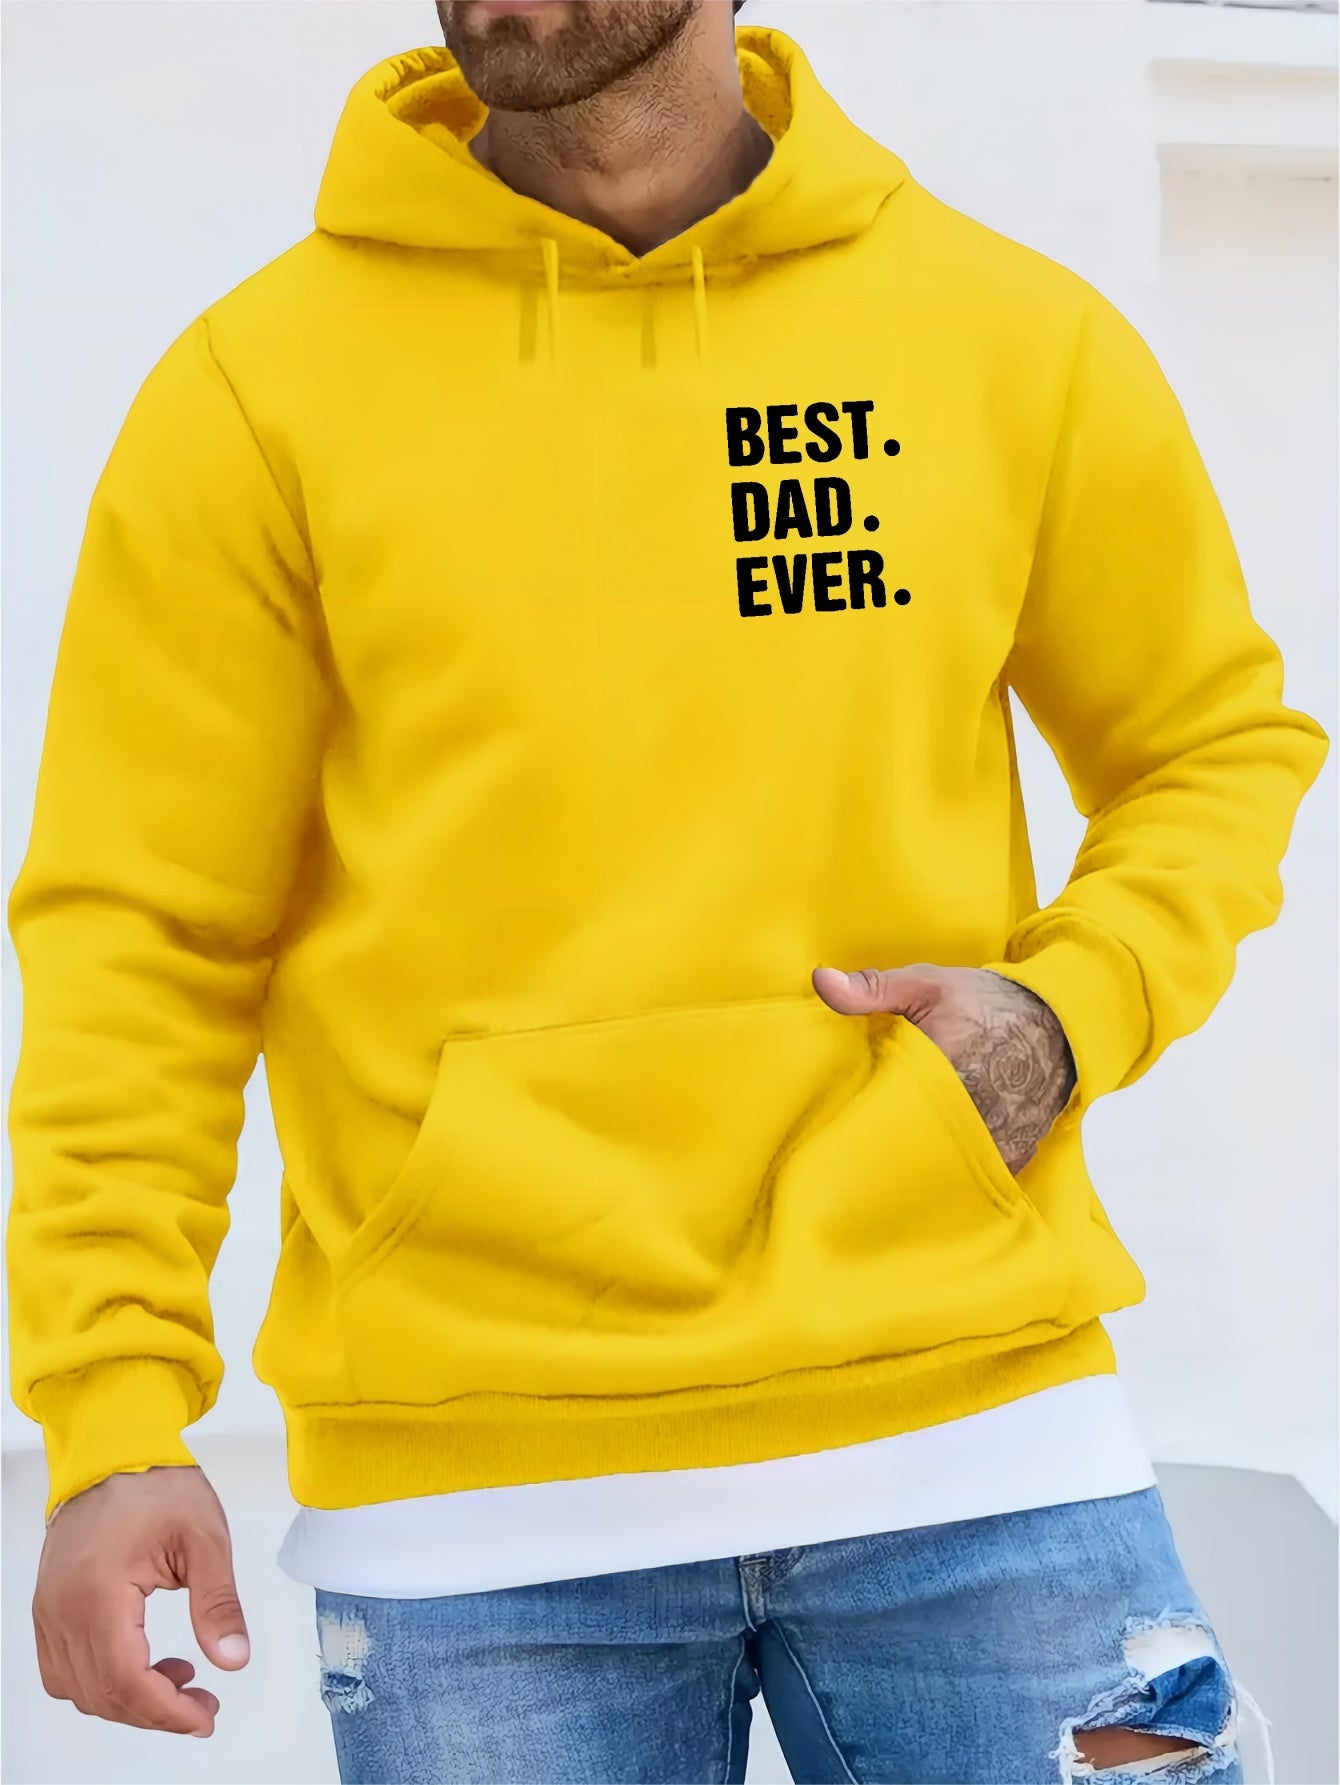 BEST DAD EVER Print Kangaroo Pocket Fleece Sweatshirt Hoodie Pullover, Fashion Street Style Long Sleeve Sports Tops, Graphic Pullover Shirts For Men Autumn Winter Gifts